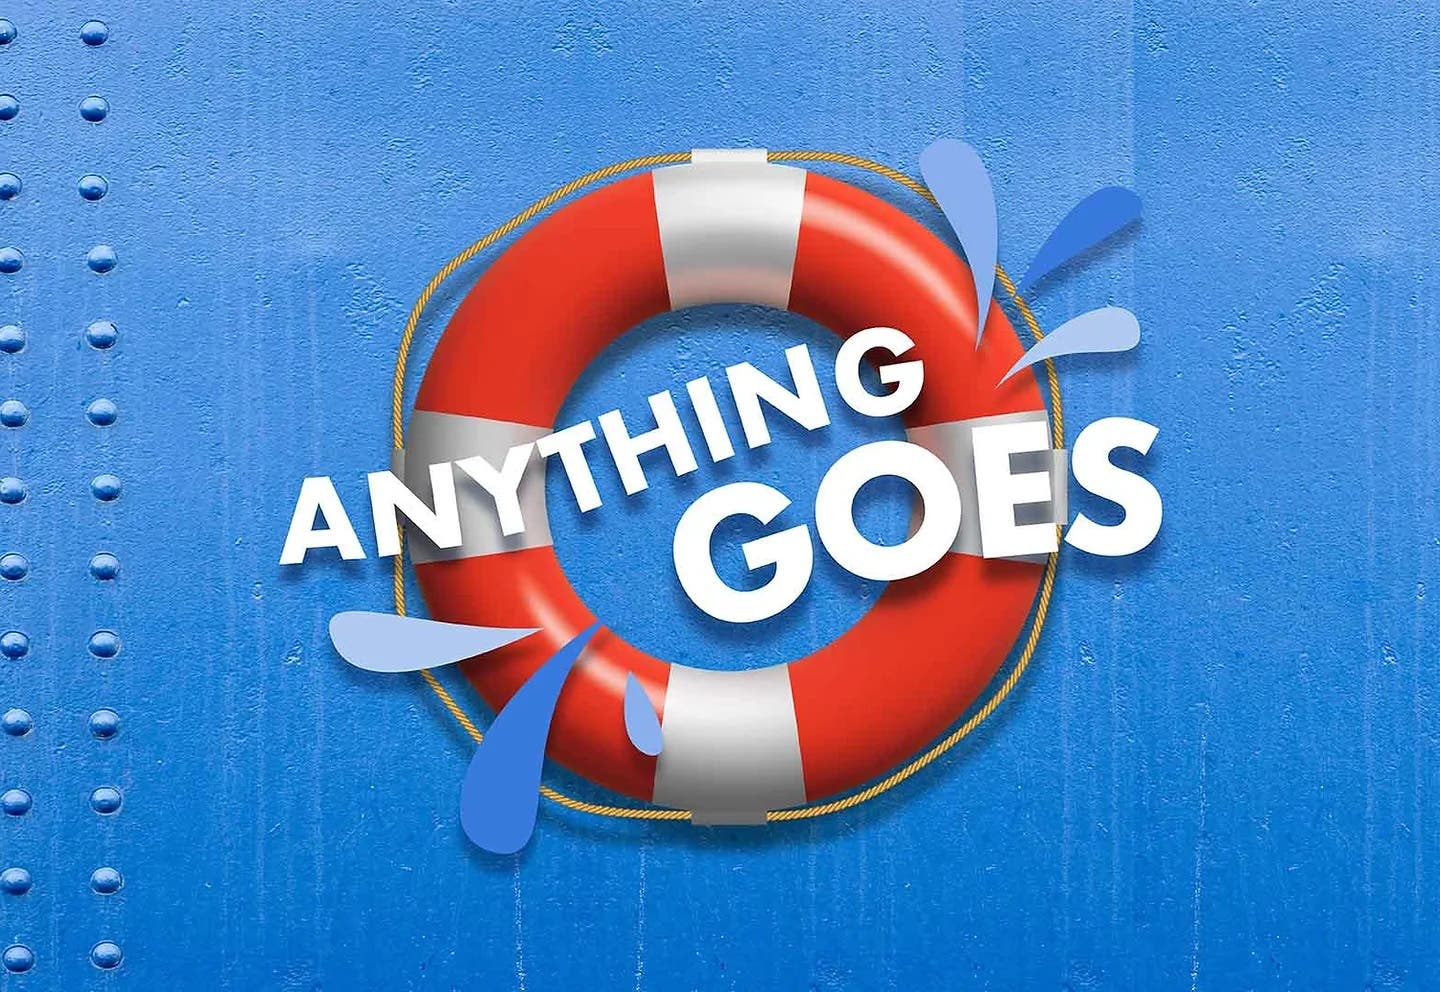 Anything Goes opens Friday at Music Mountain Theatre